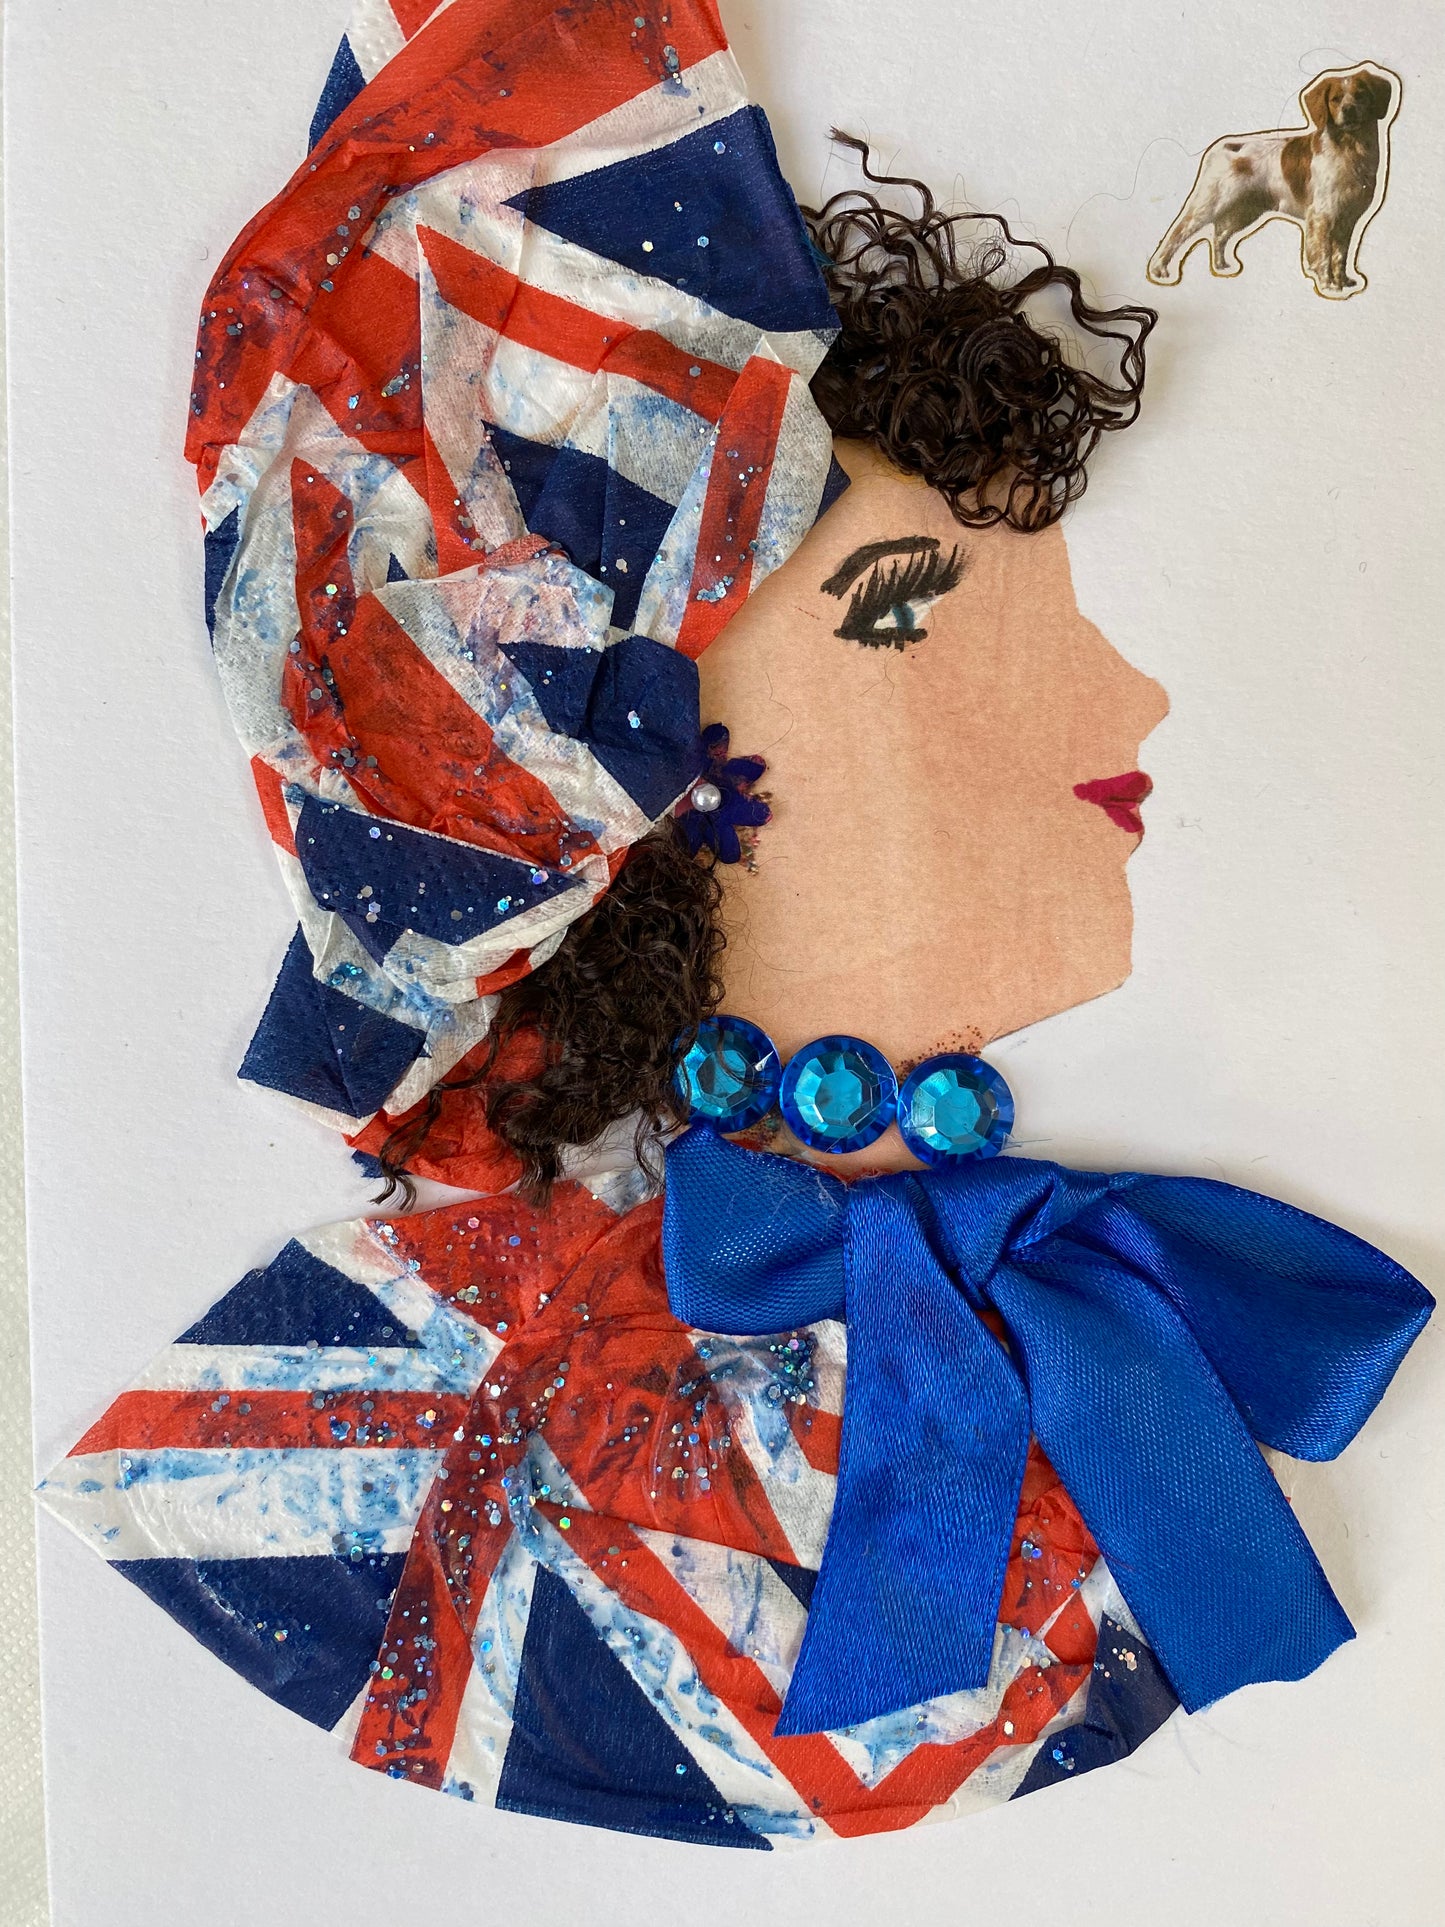 I designed this card of a woman named Dr. Buckingham Belinda. She has a white skin tone and is wearing a beautiful London flag print hat. She wears a matching London flag print blouse with a blue silk bow. She wears dazzling blue jewellery. In the corner there is a dog.